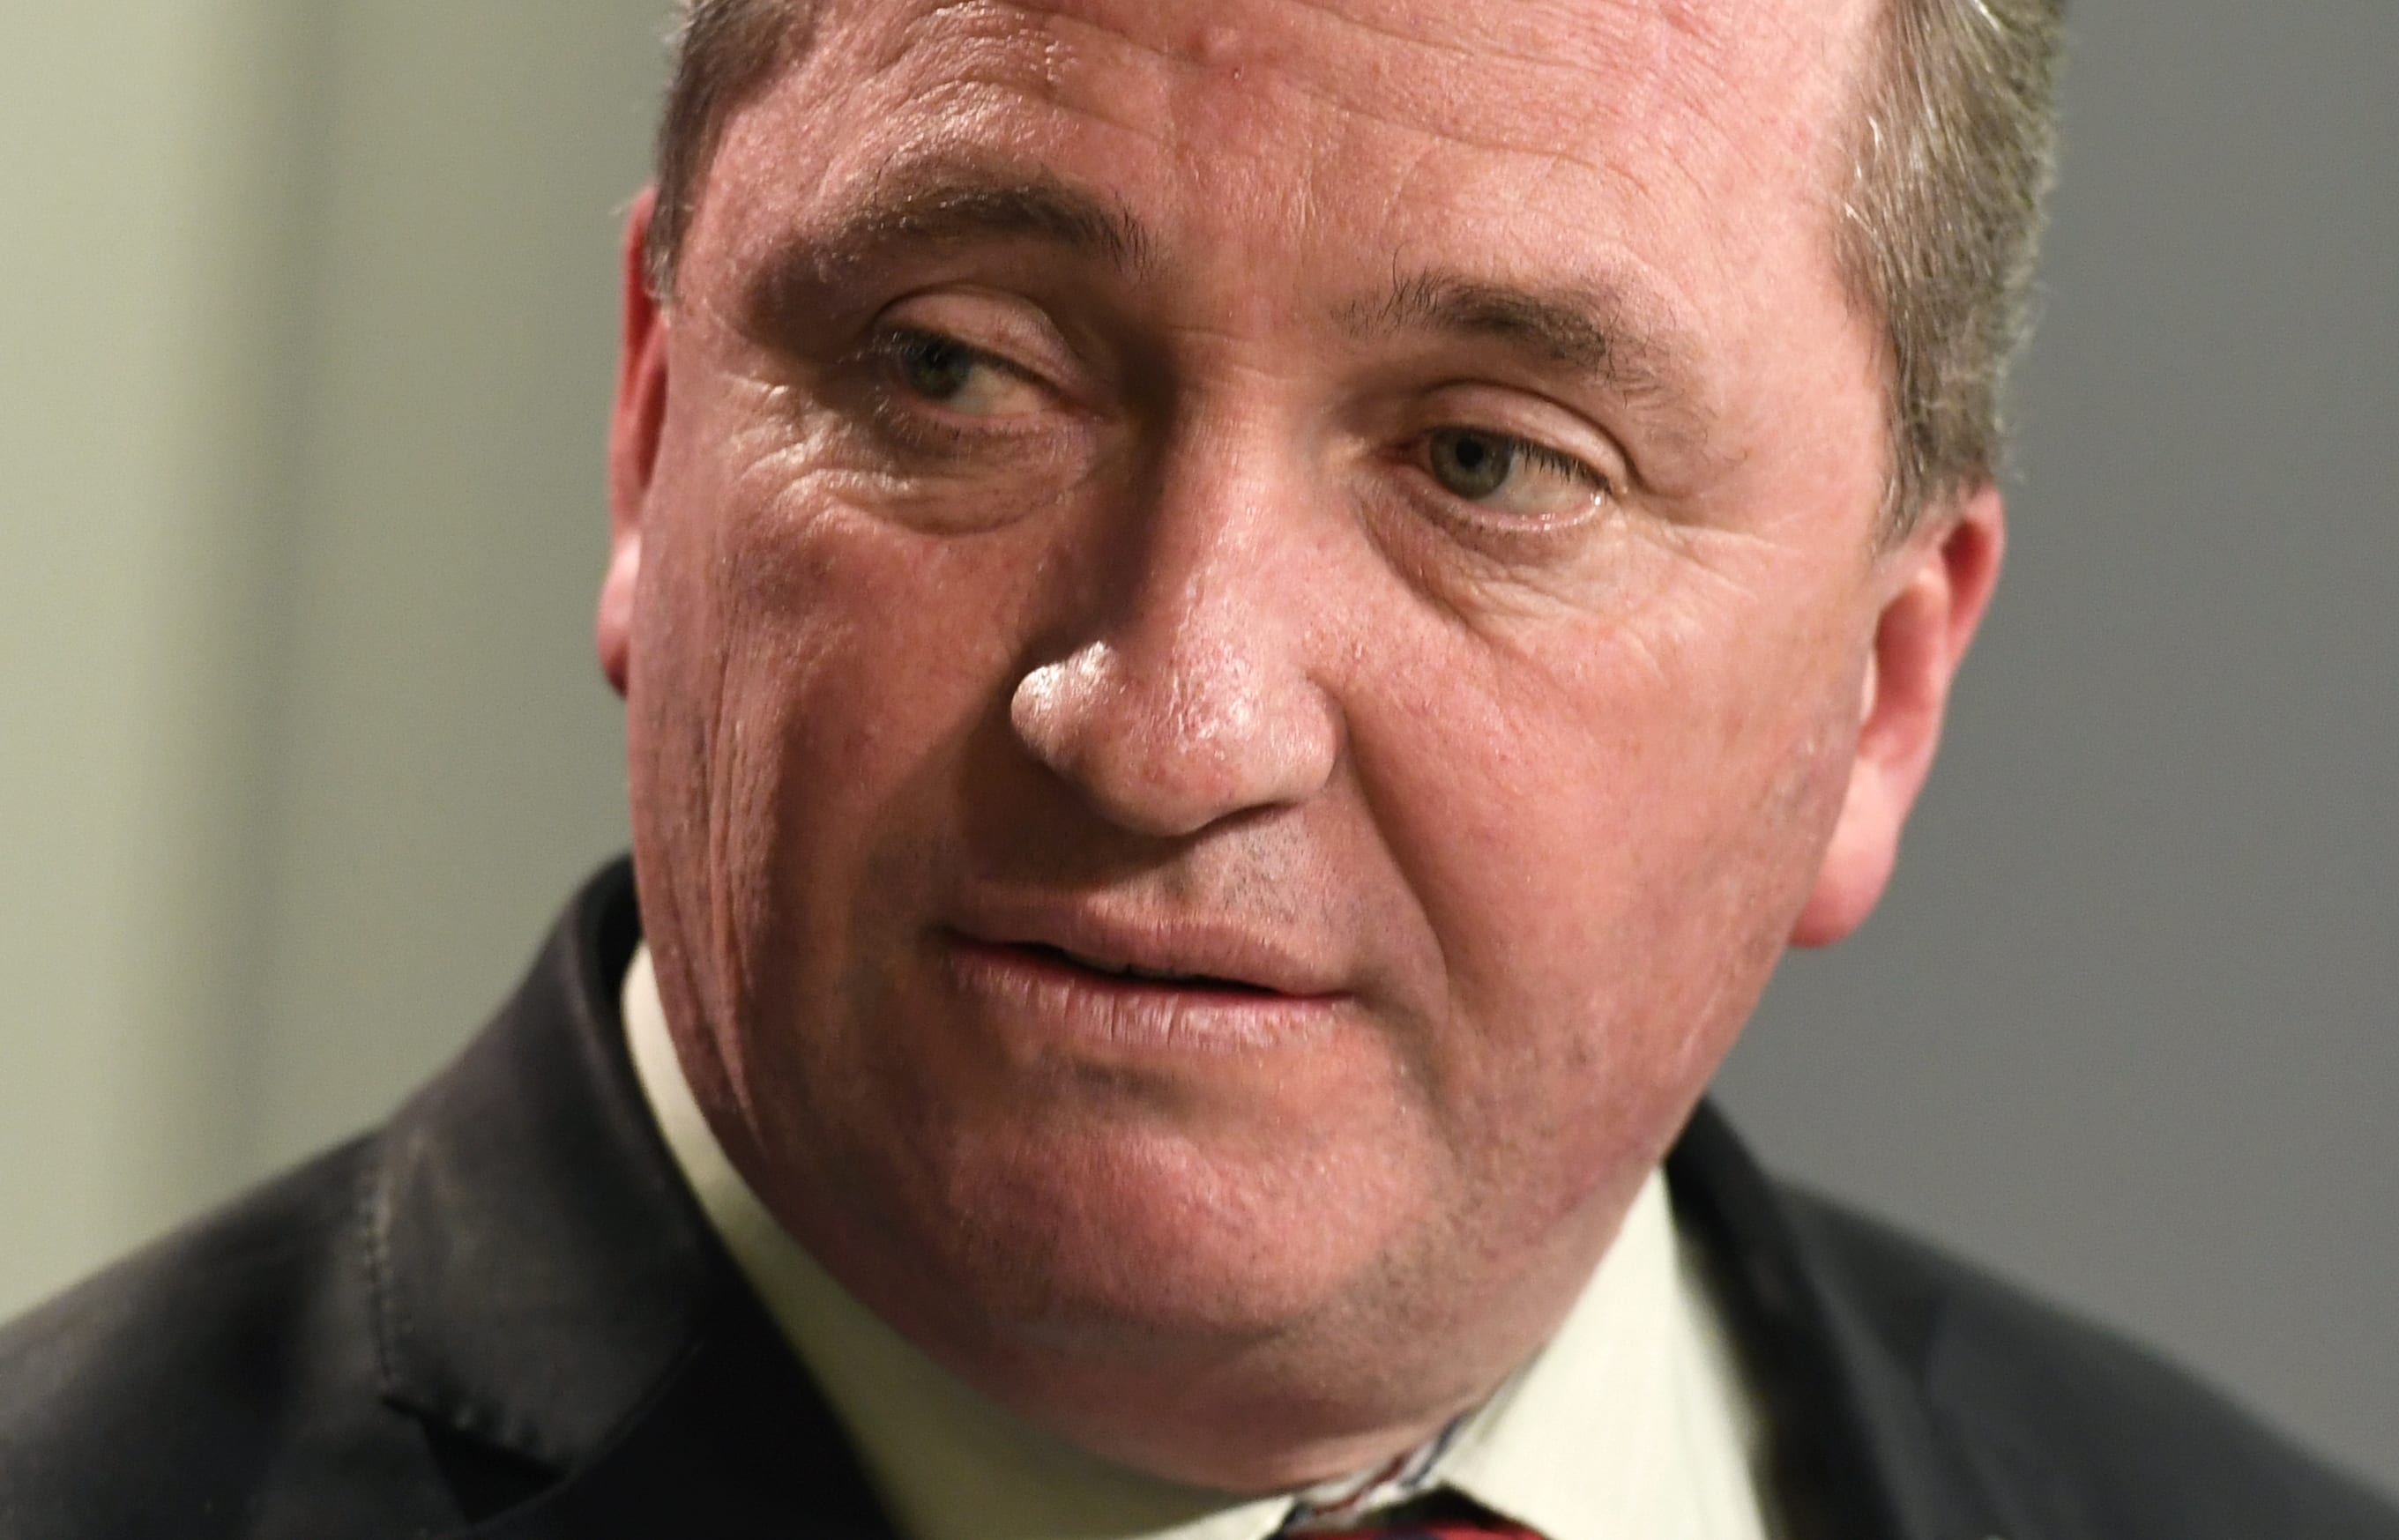 Barnaby Joyce said he was "shocked" to have been told he may be a New Zealand citizen by descent.